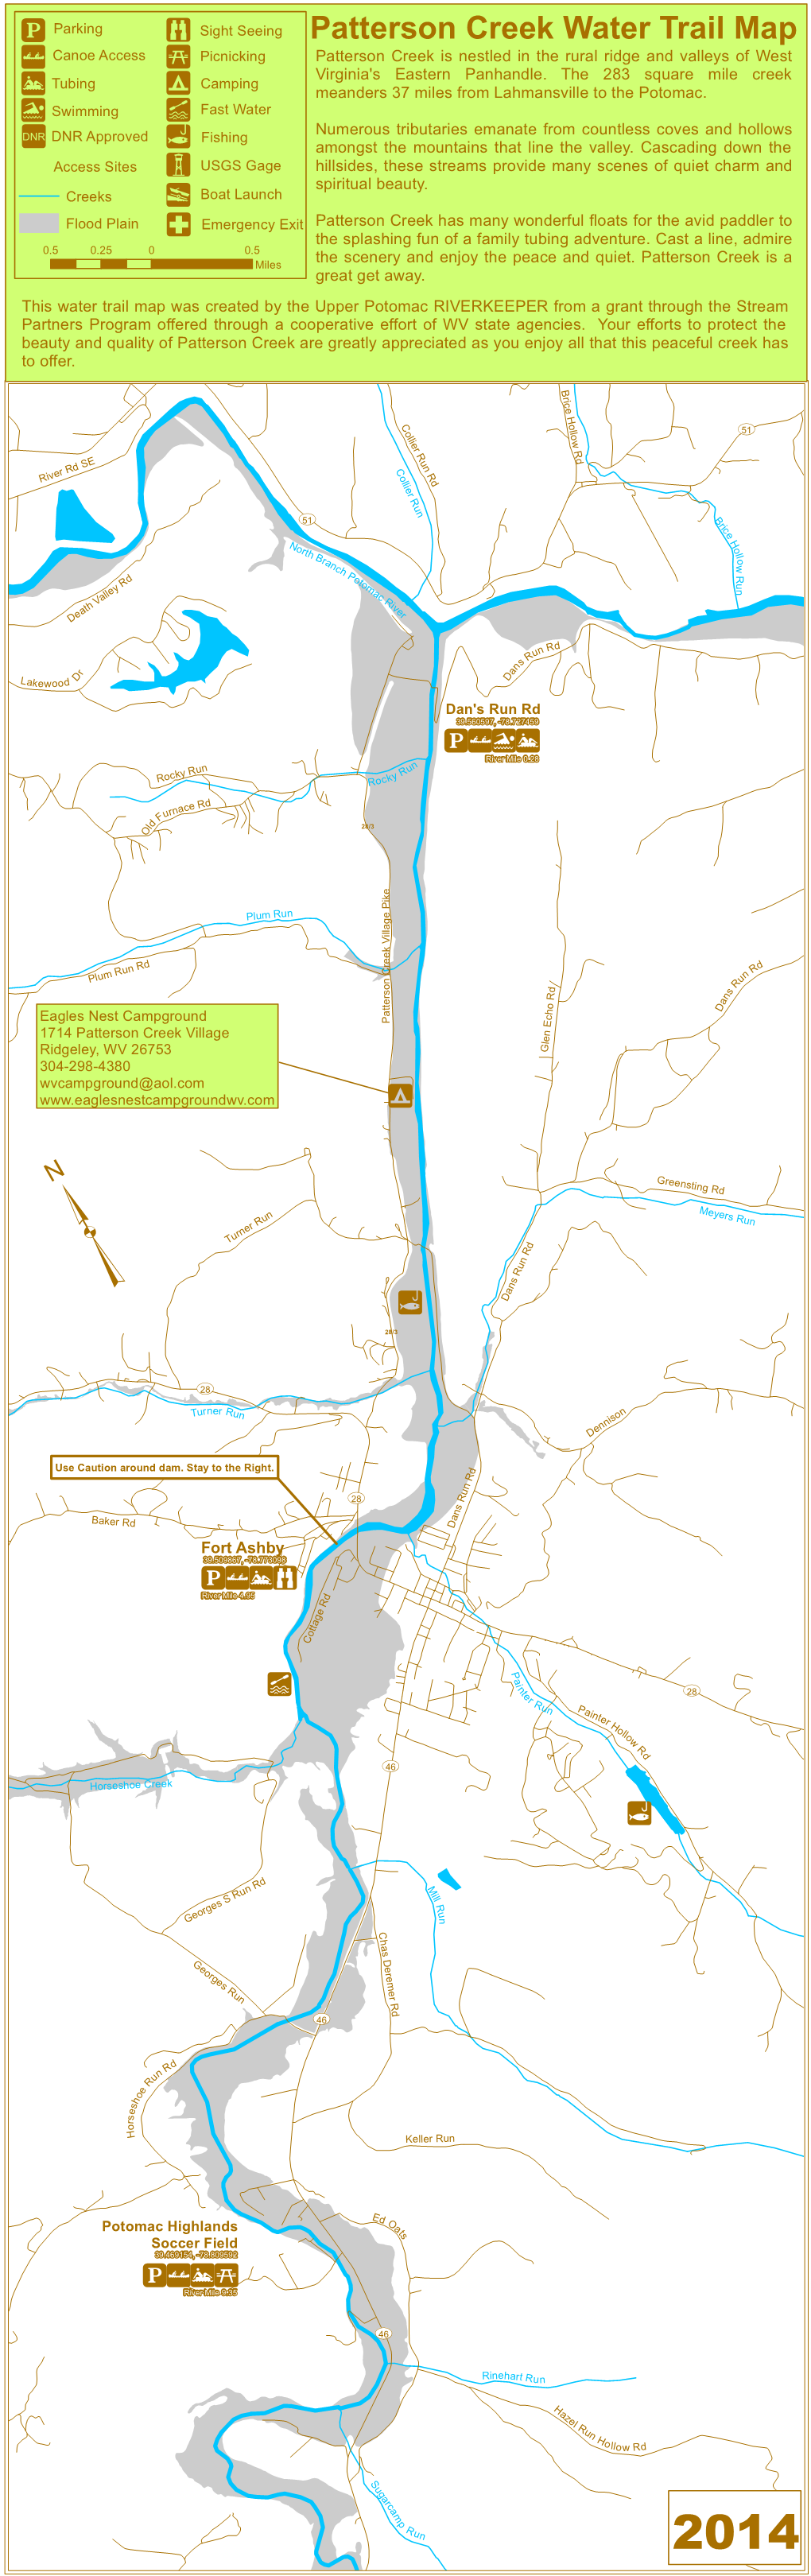 Patterson Creek Water Trail Map | Canoe Access 5 Picnicking Patterson Creek Is Nestled in the Rural Ridge and Valleys of West Virginia's Eastern Panhandle